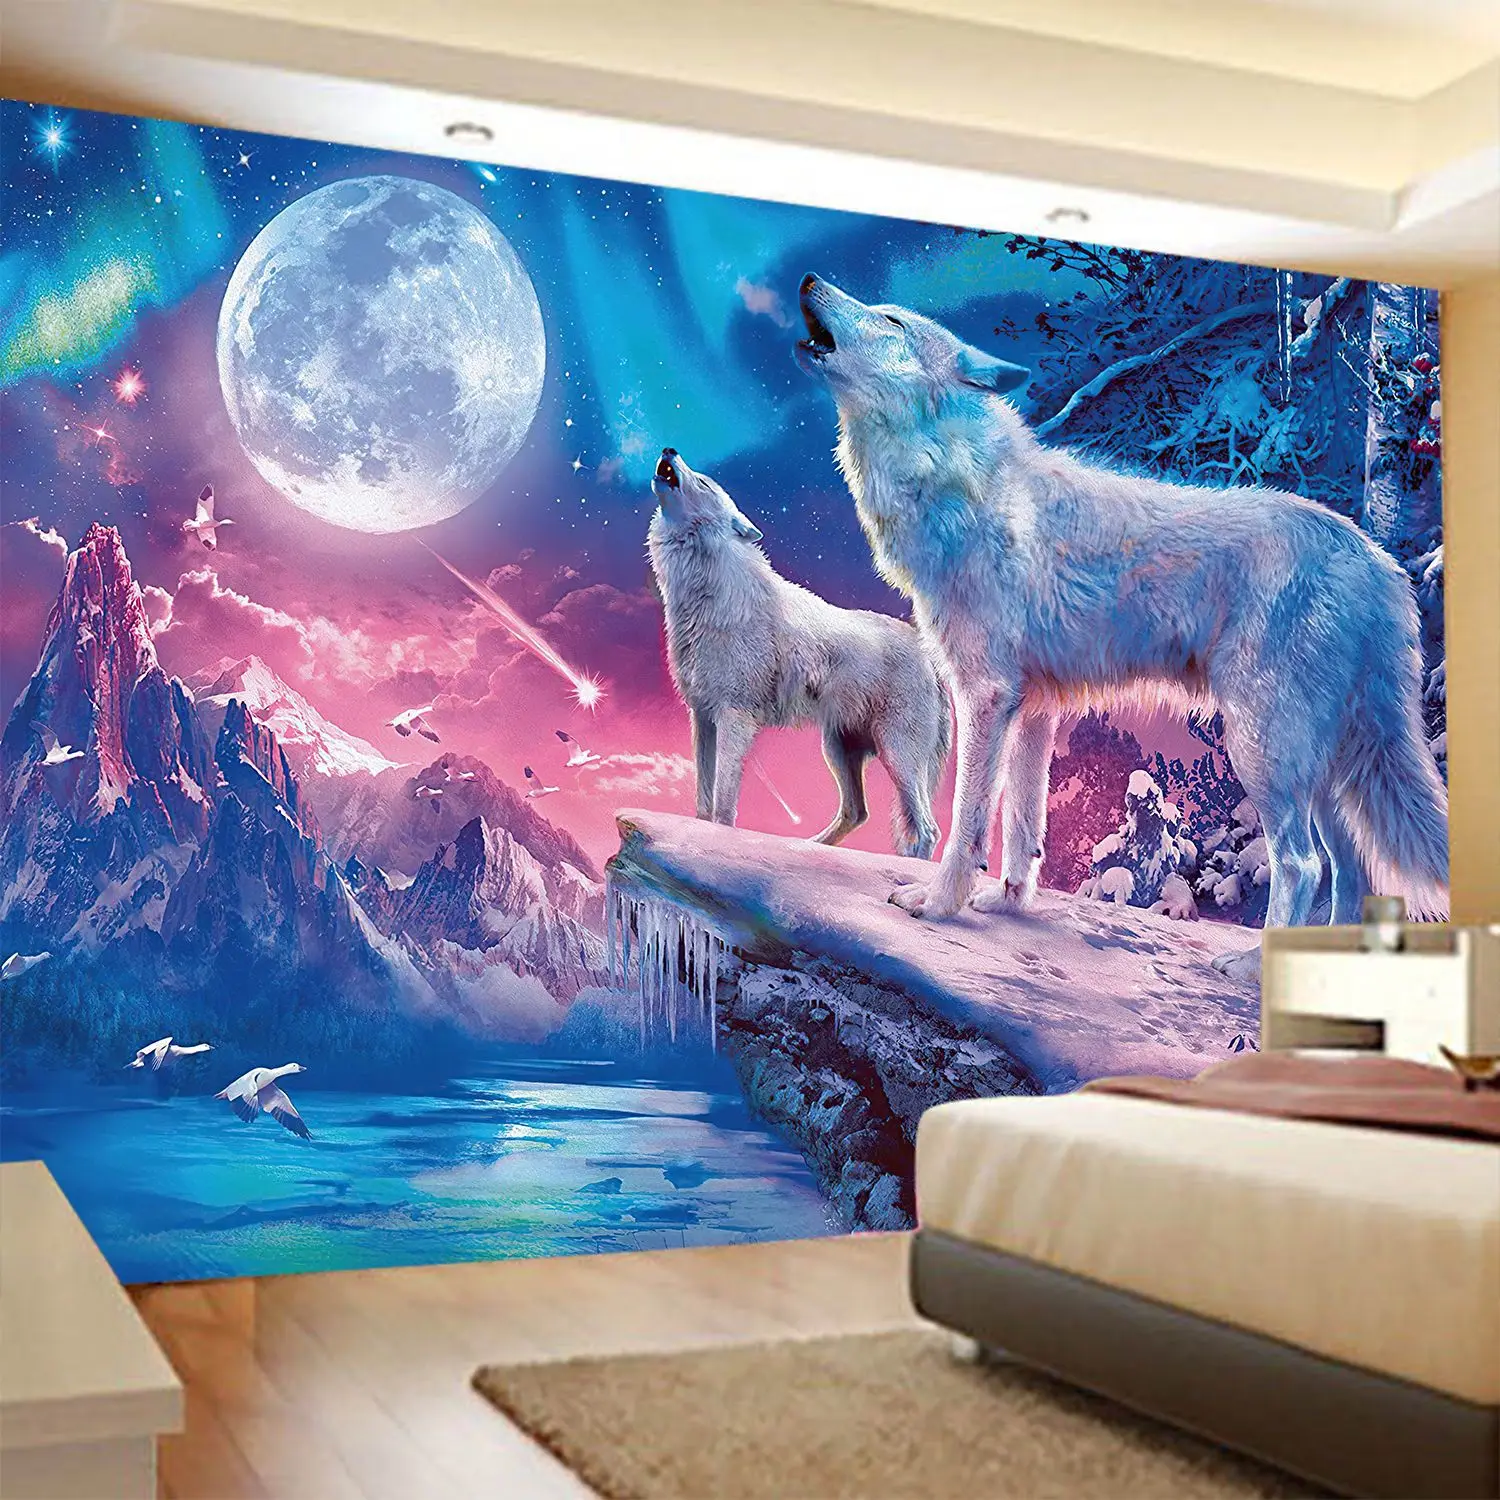 

Moon Wolves in the Forest Tapestry Wall Hanging Hippie Tapiz Animal Mystery Psychedelic Landscape Dorm Home Decor